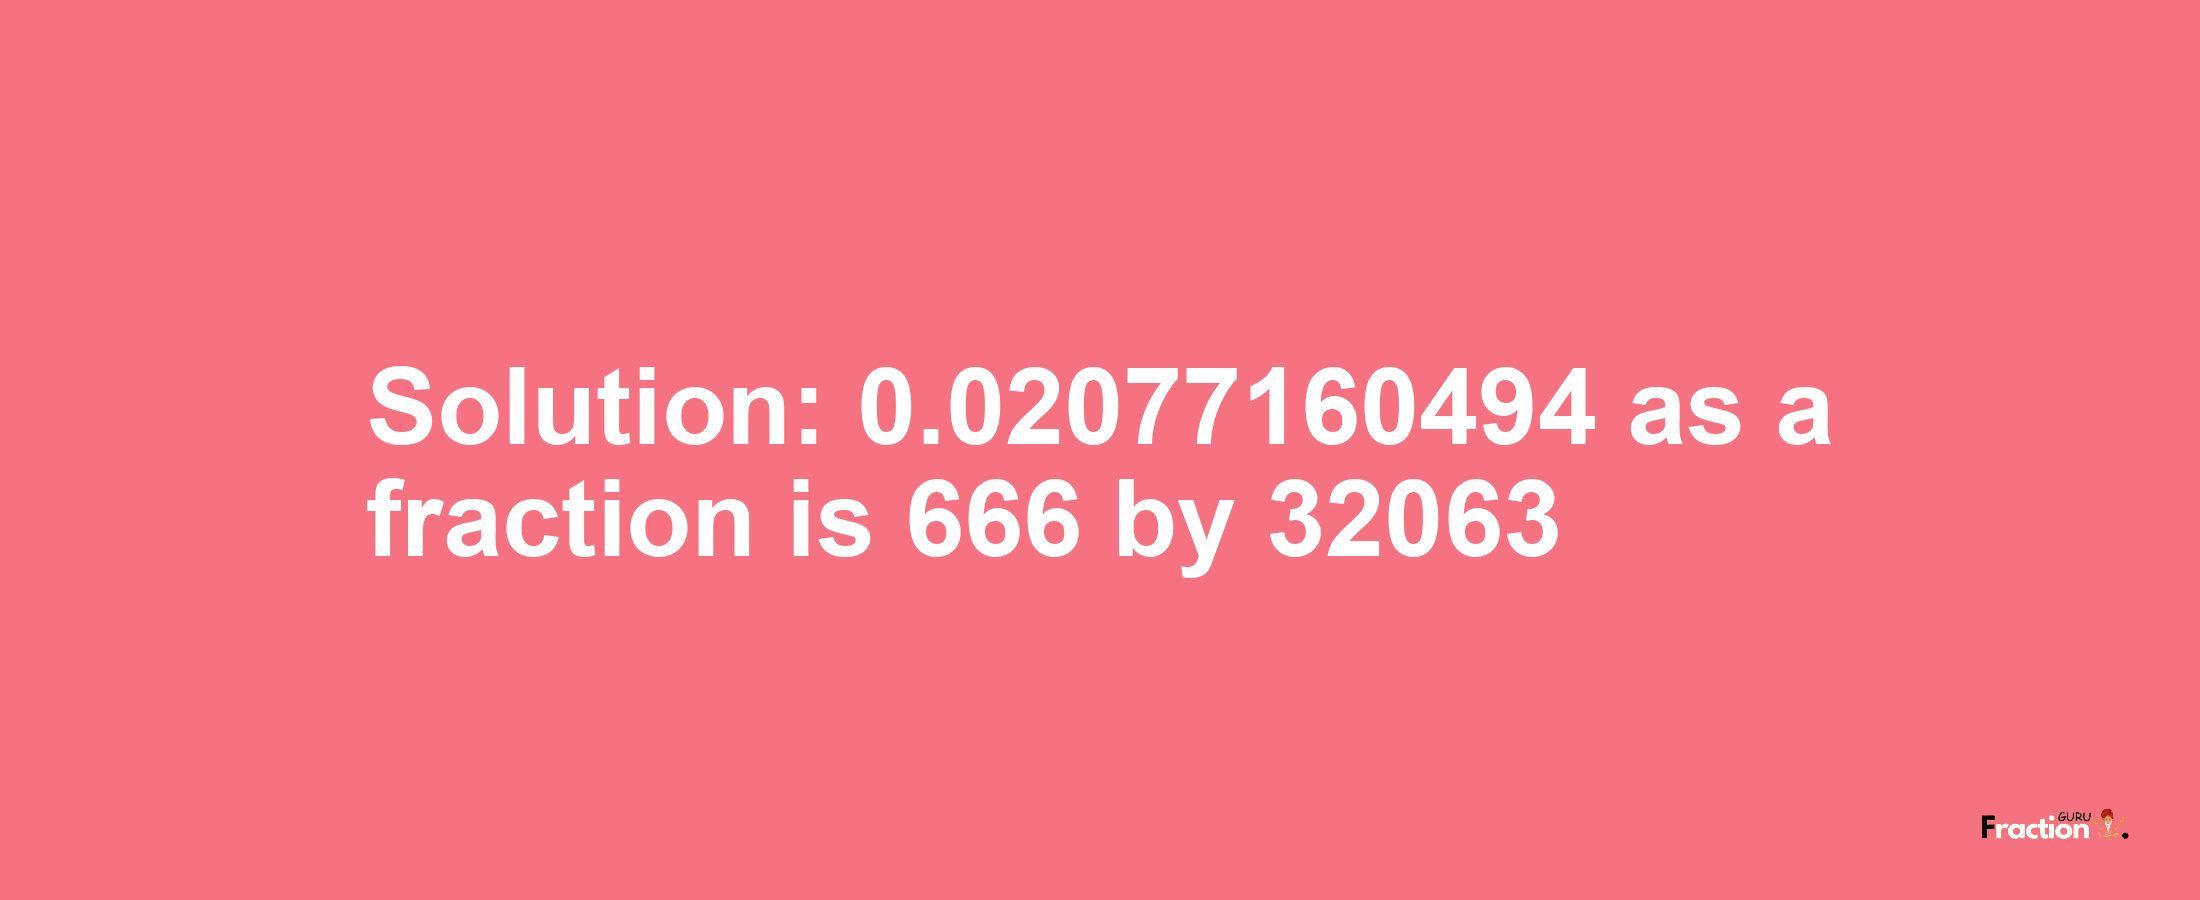 Solution:0.02077160494 as a fraction is 666/32063